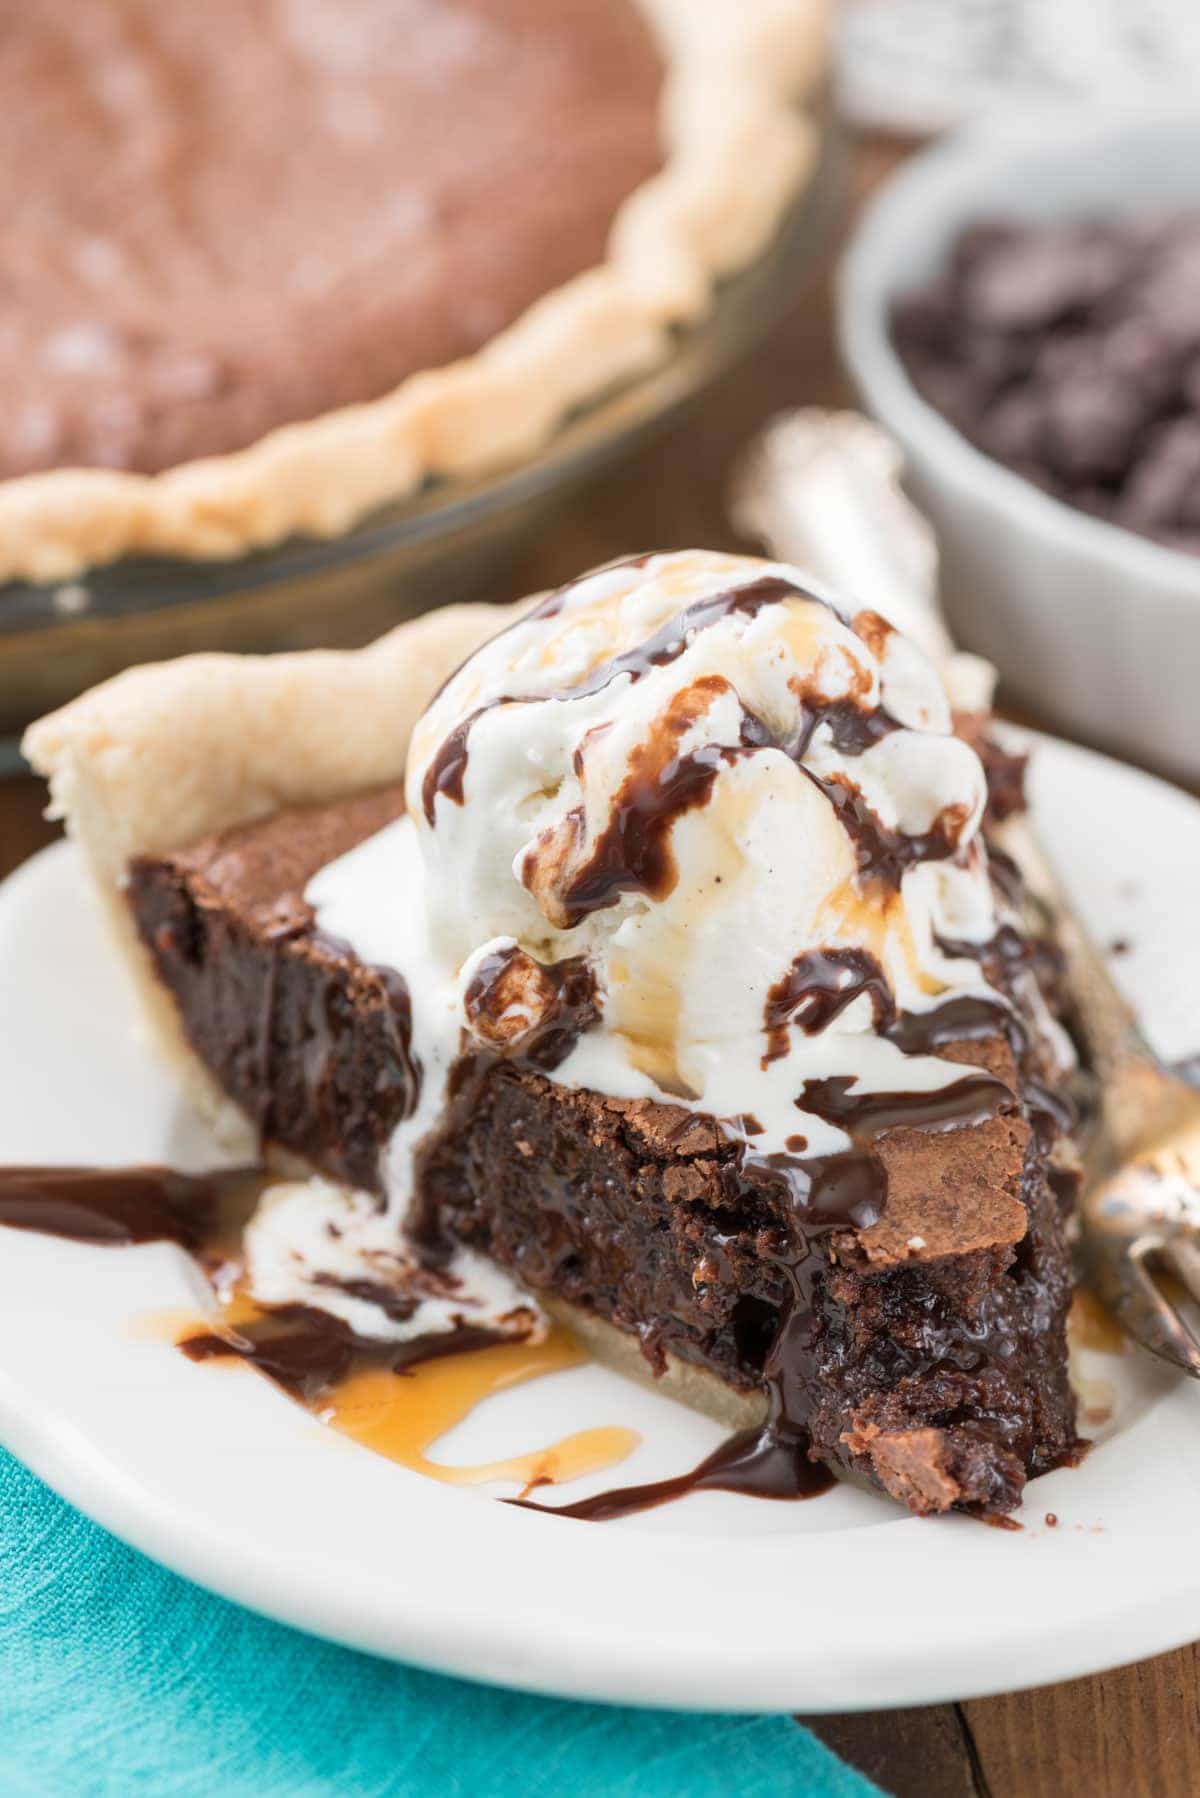 This is the BEST Brownie Pie Recipe and it's completely from scratch! Gooey, fudgy, and chocolatey - it's an EASY pie recipe you NEED!